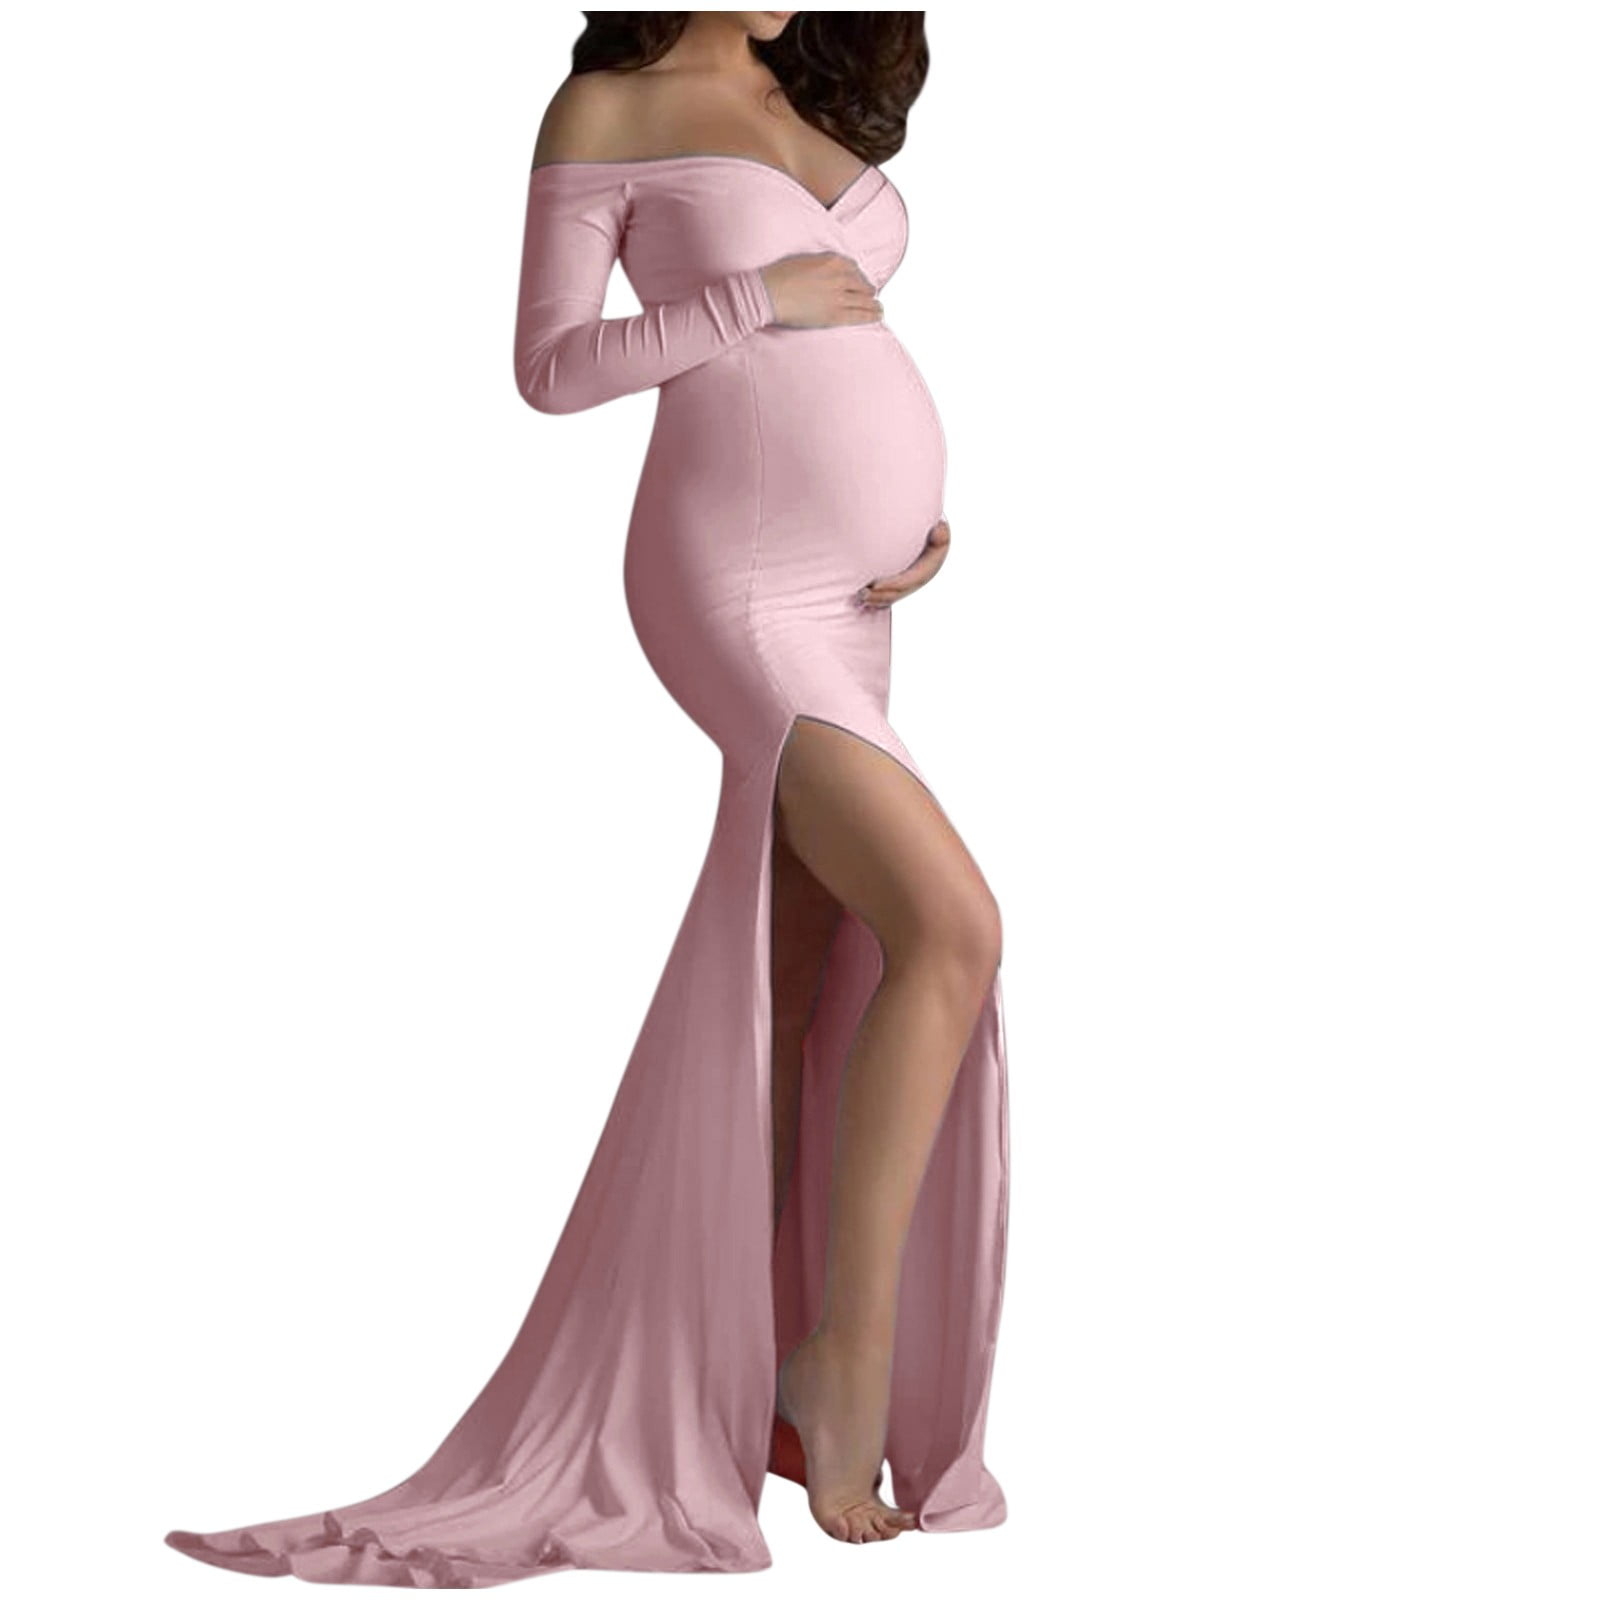 Women Pregnant Sexy Photography Props Off V-Neck Slit Long Maternity Mama Sundress Casual Fashion Summer Clothes - Walmart.com